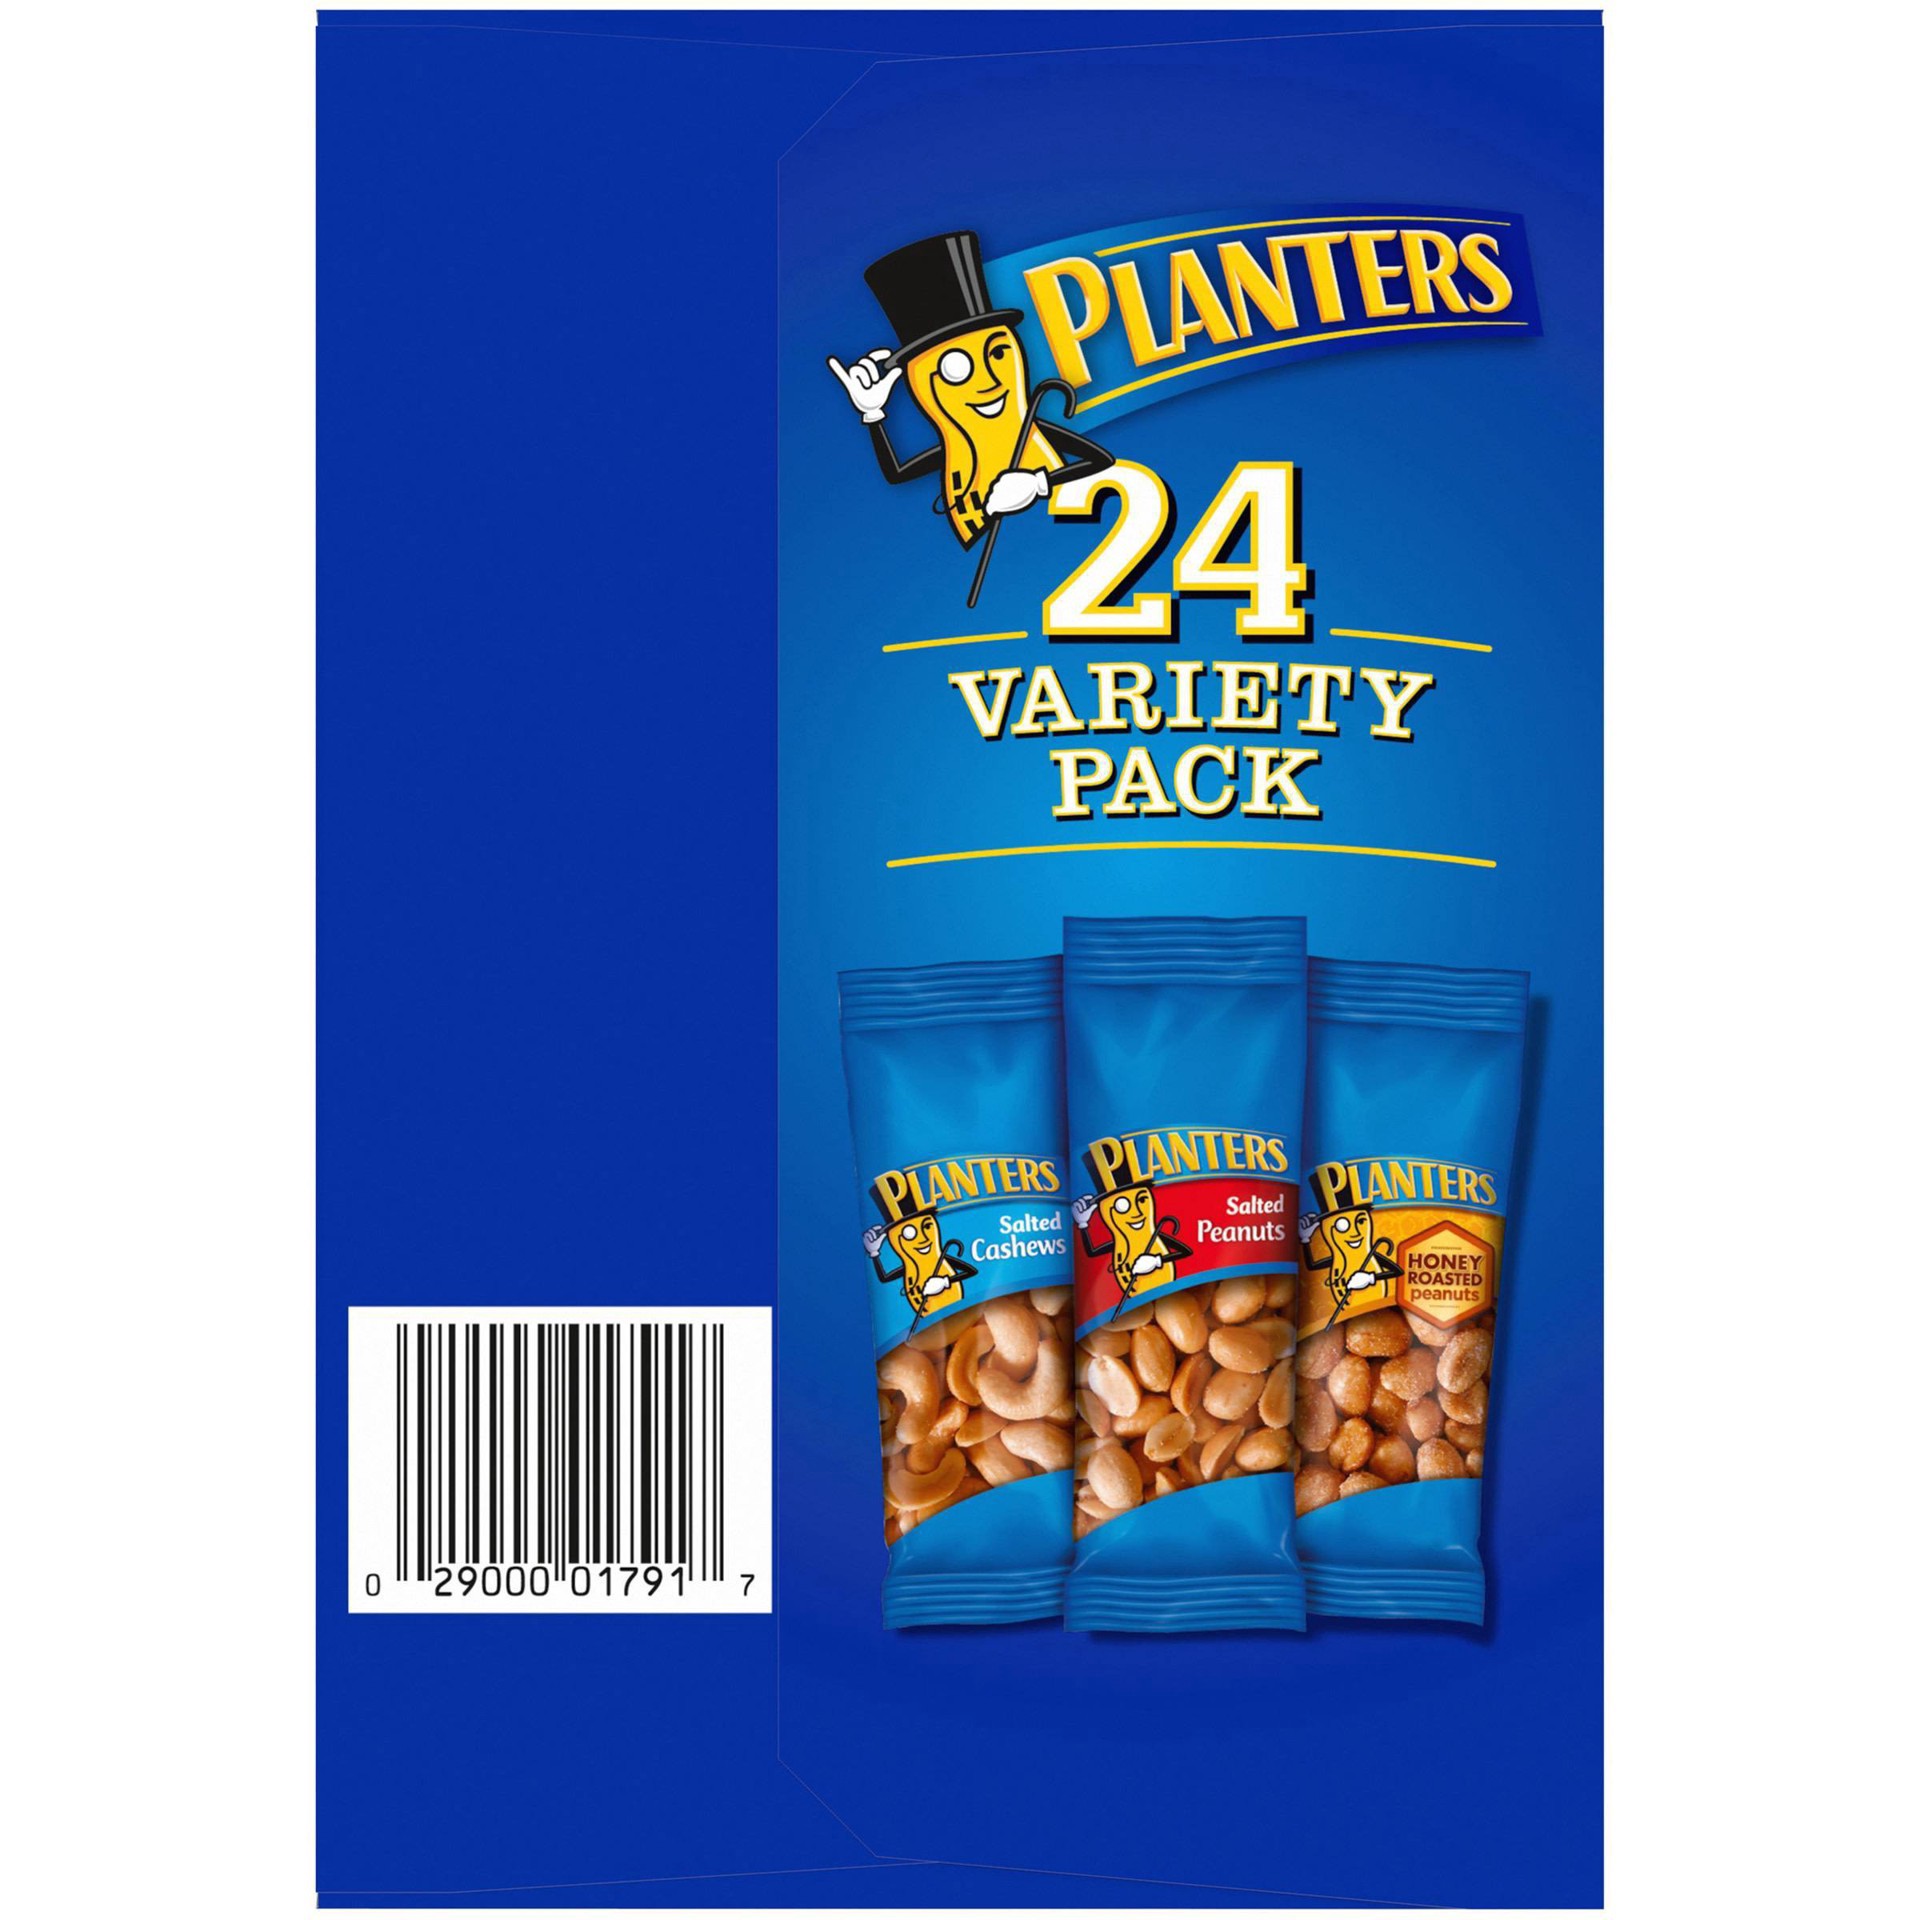 slide 7 of 27, Planters Nuts Cashews and Peanuts Variety Pack Snack Nuts, 24 ct - 40.5 oz Box, 40.5 oz